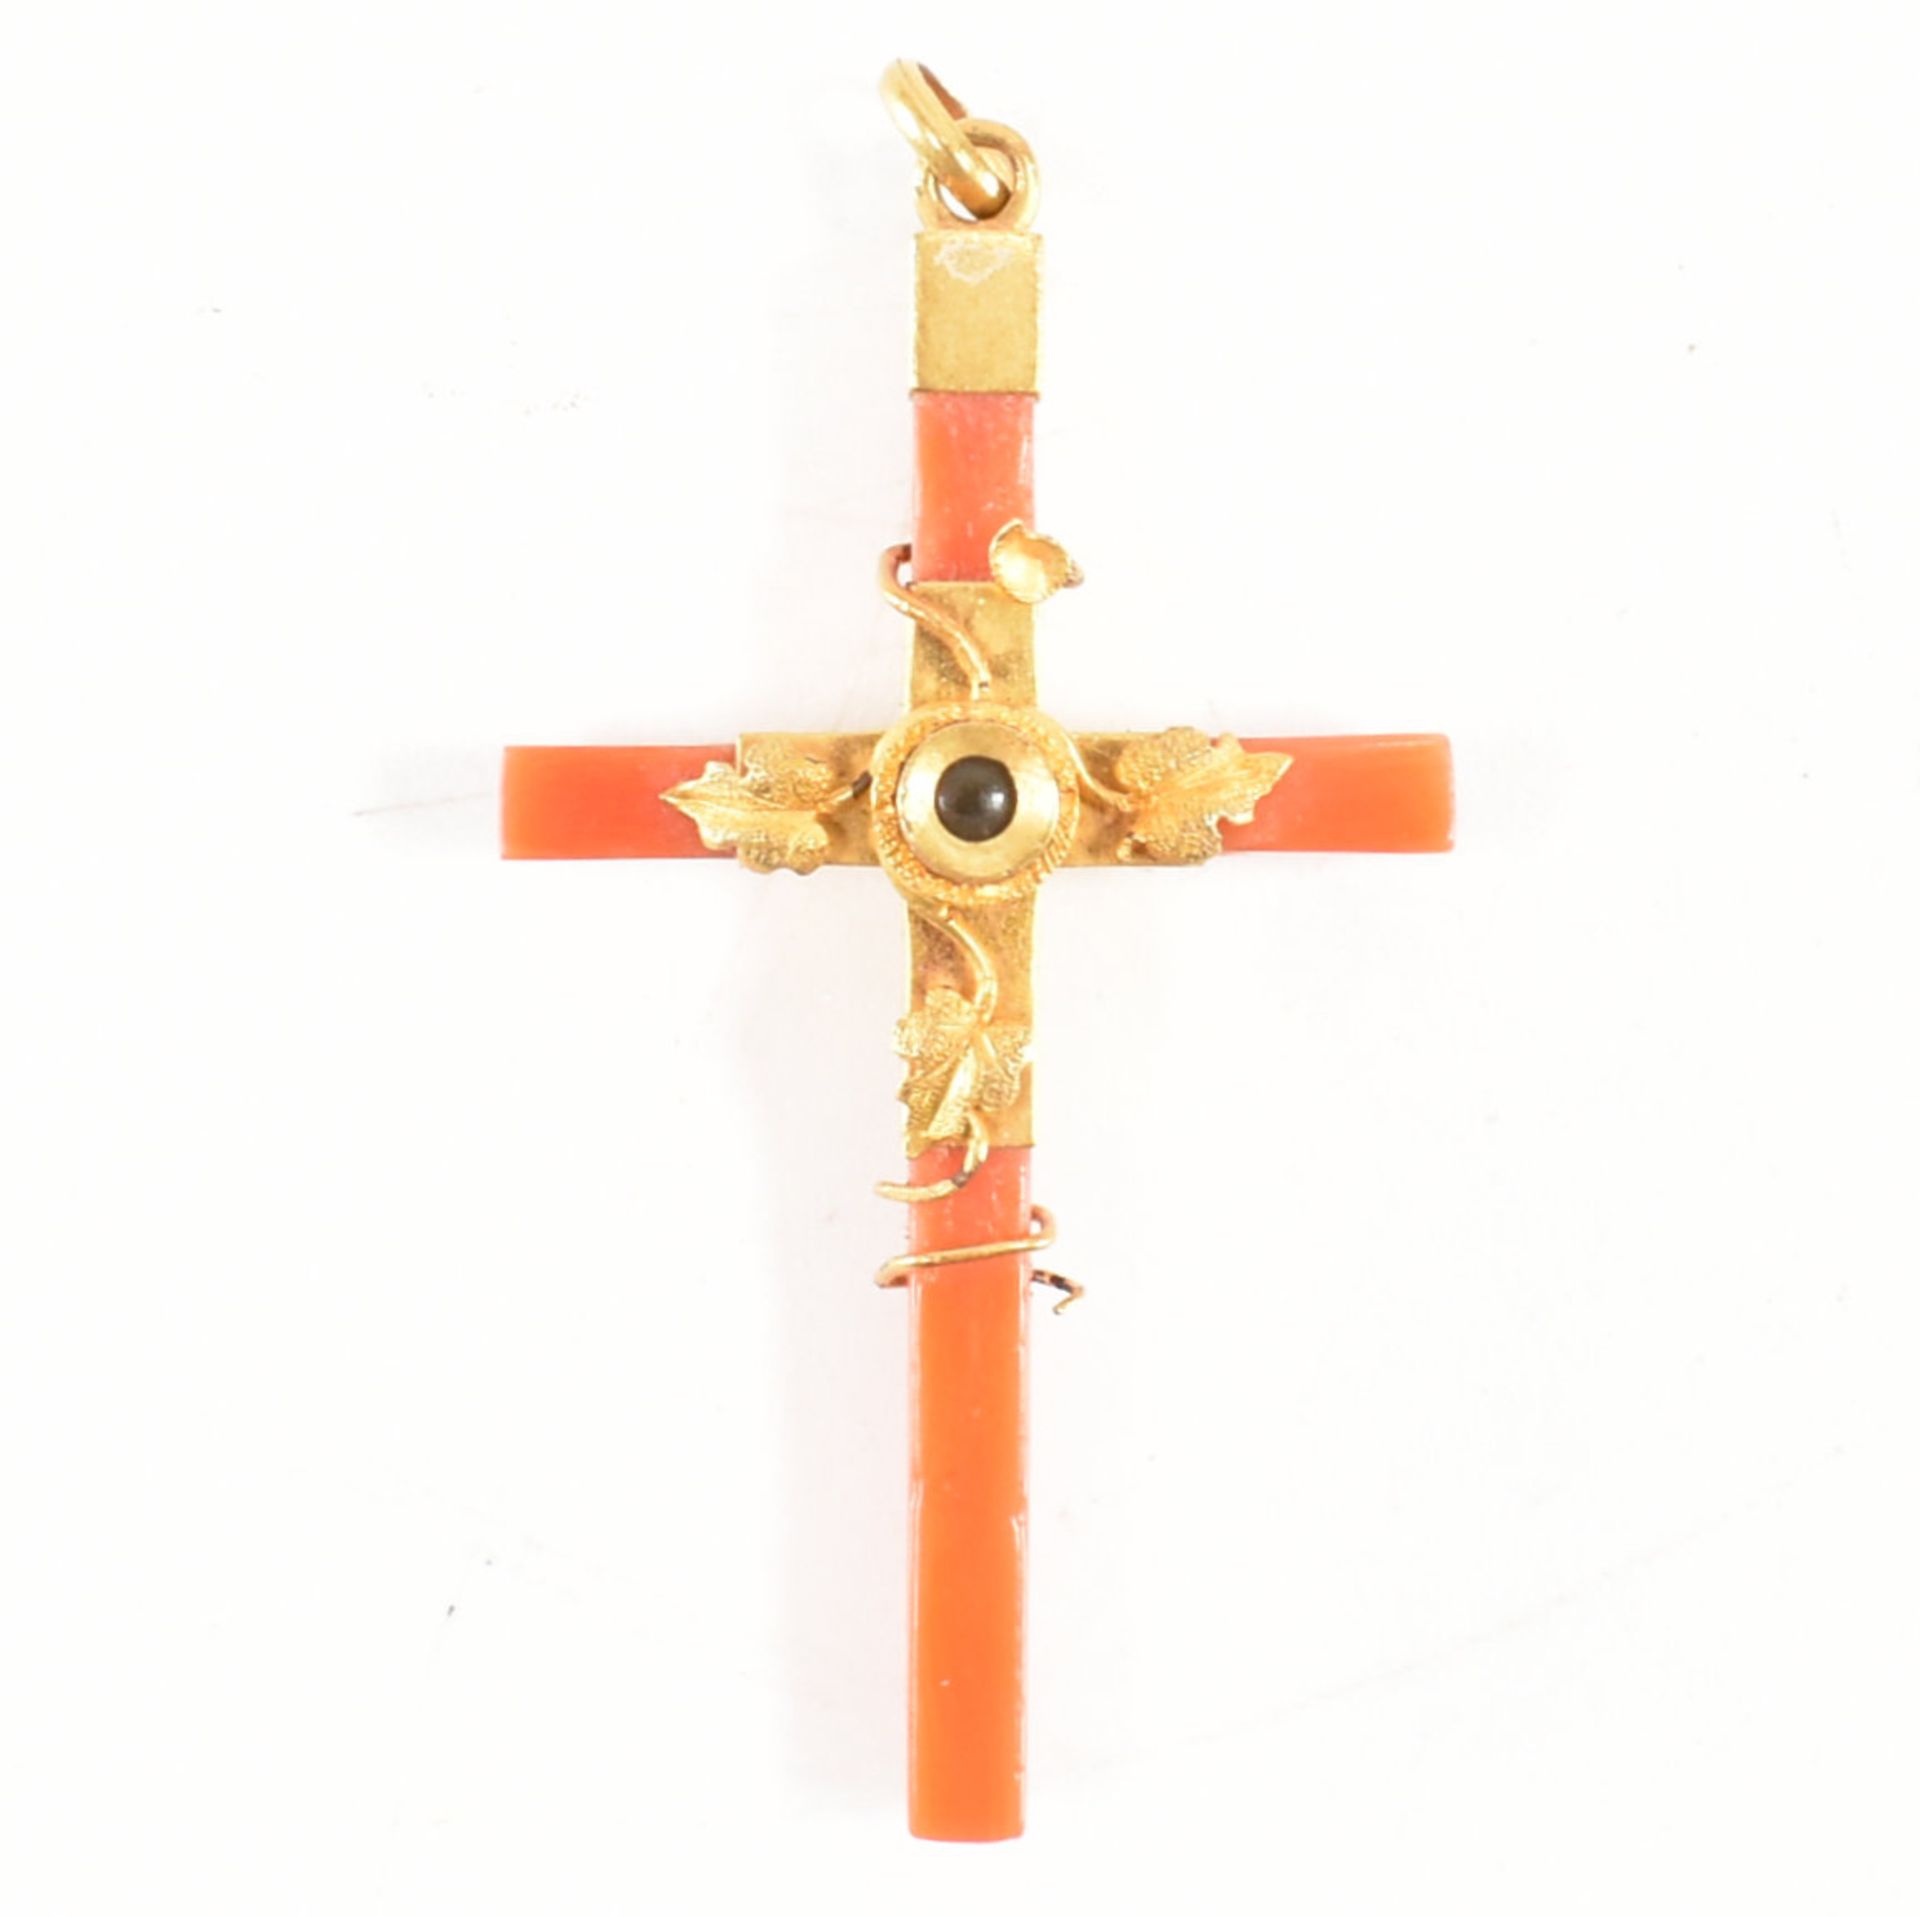 ANTIQUE GOLD & CORAL STANHOPE CROSS NECKLACE PENDANT - Image 2 of 6